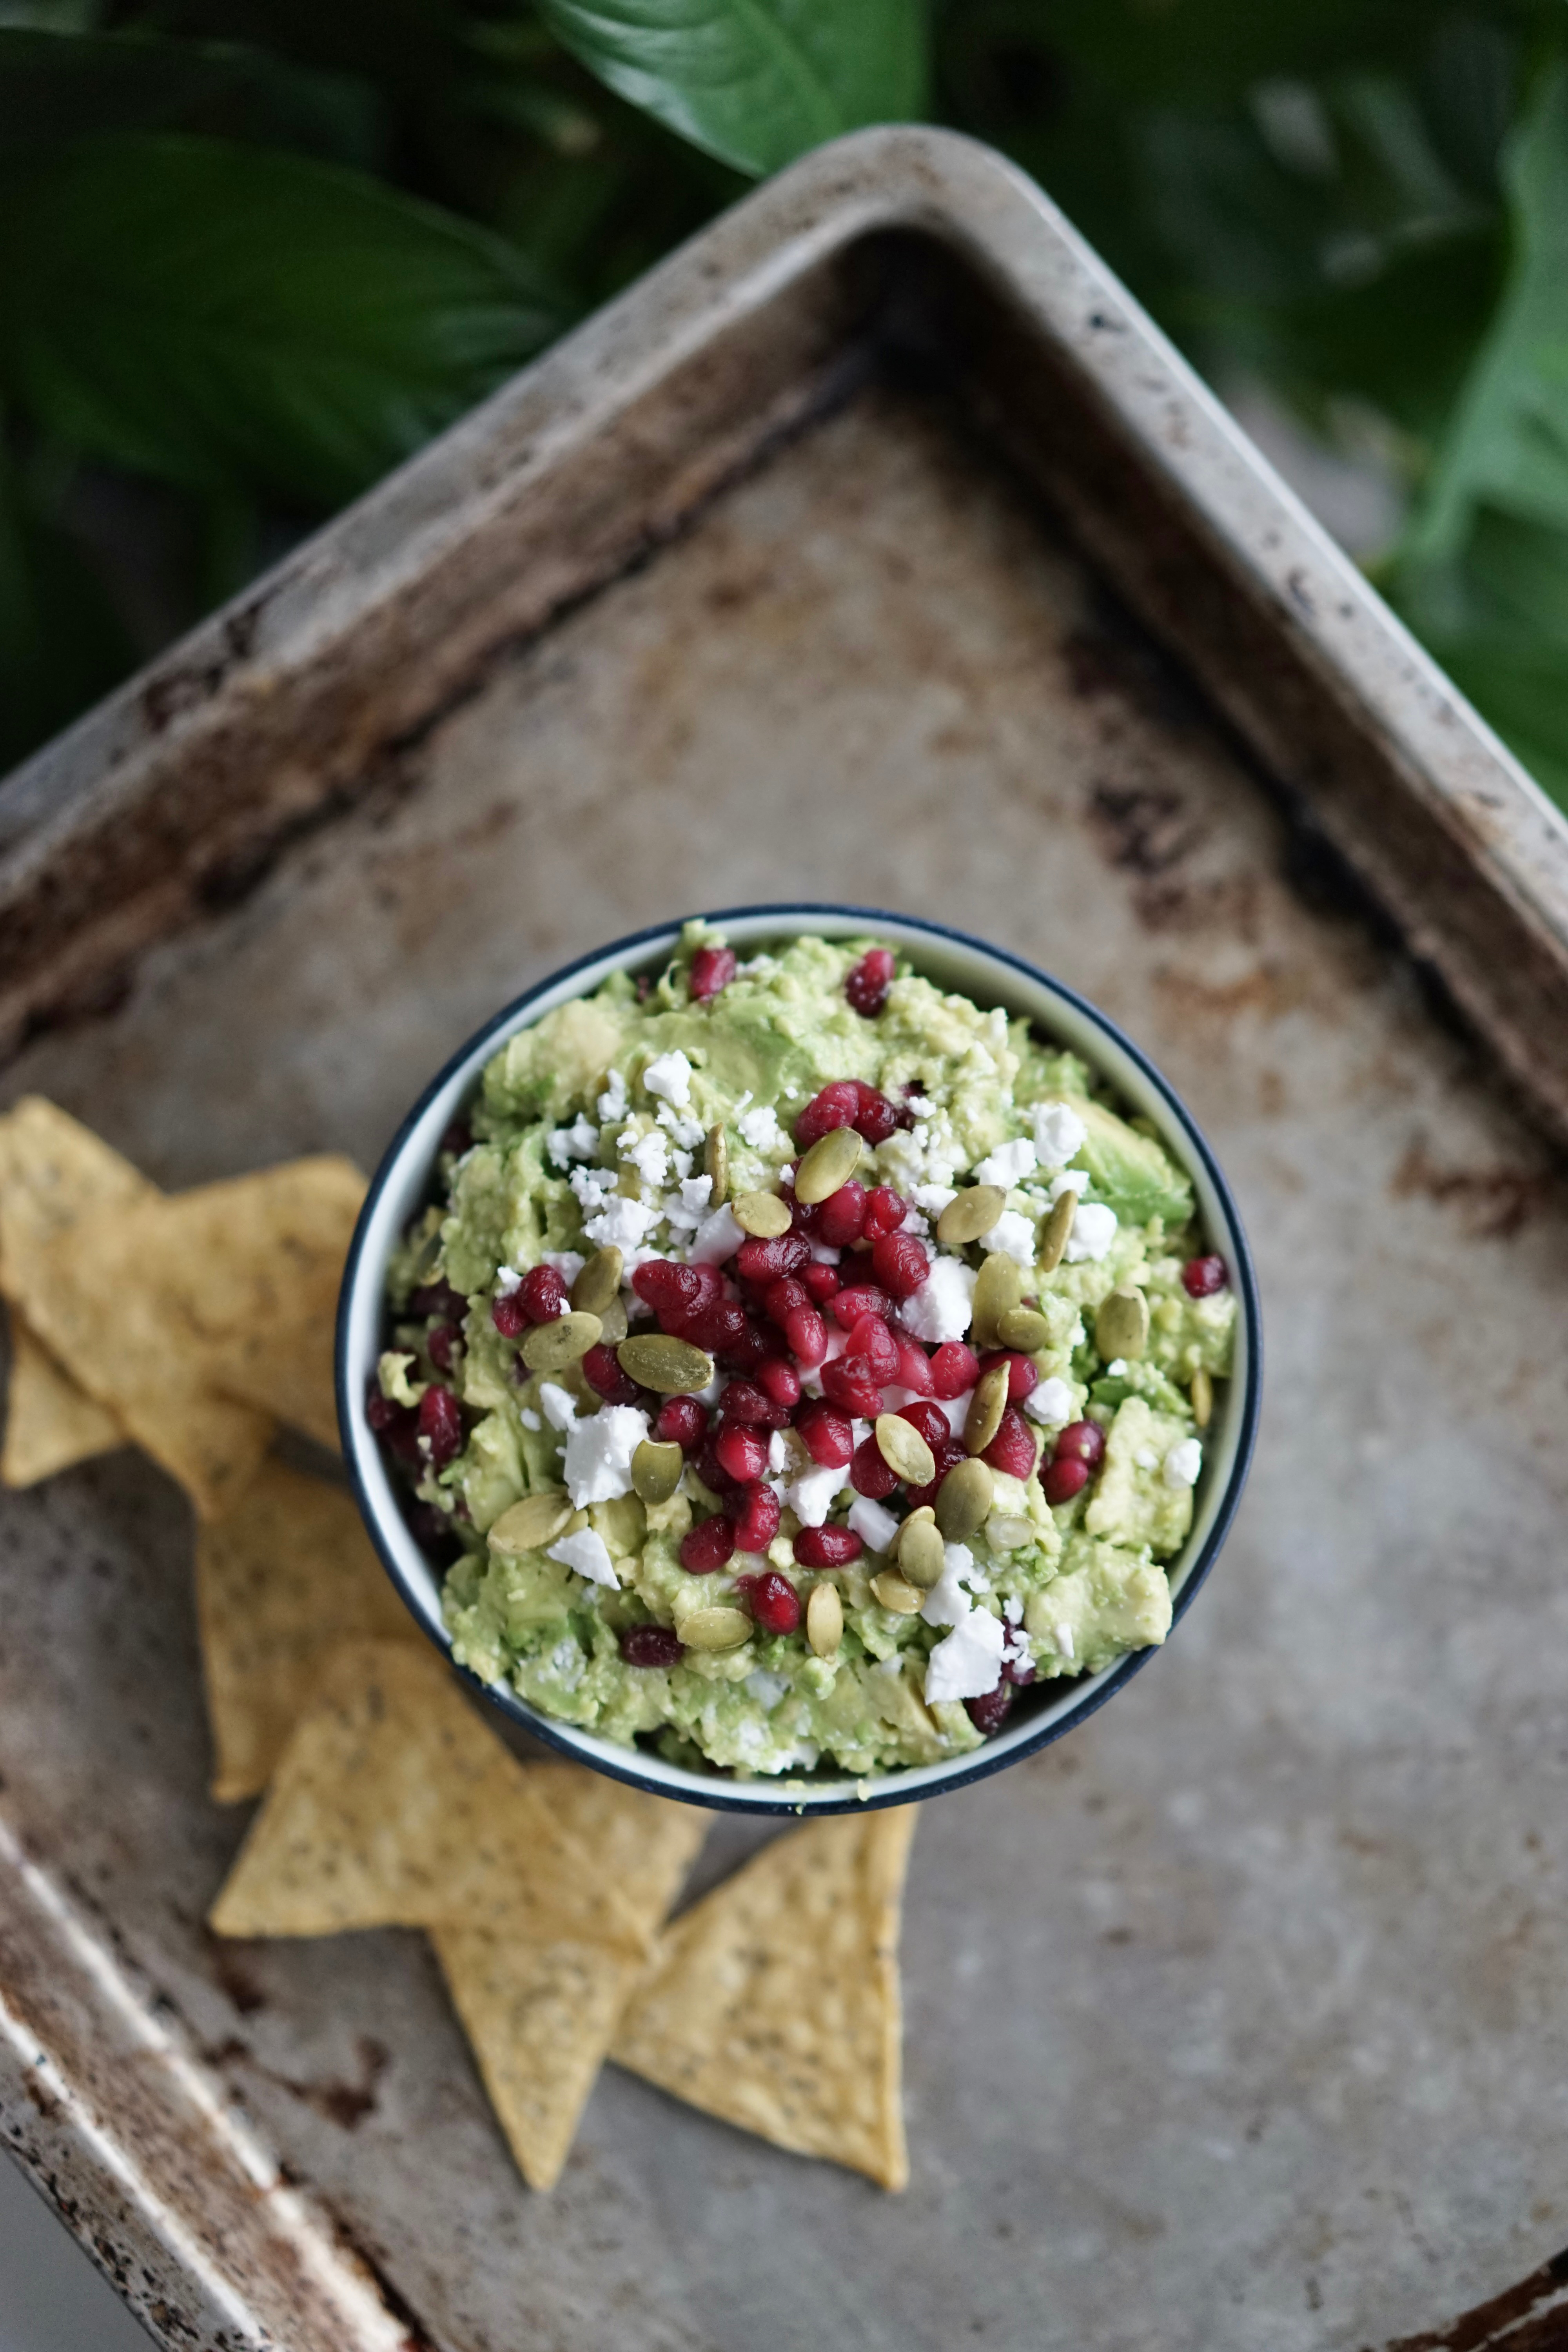 Pomegranate Avocado Dip | Living Healthy in Seattle